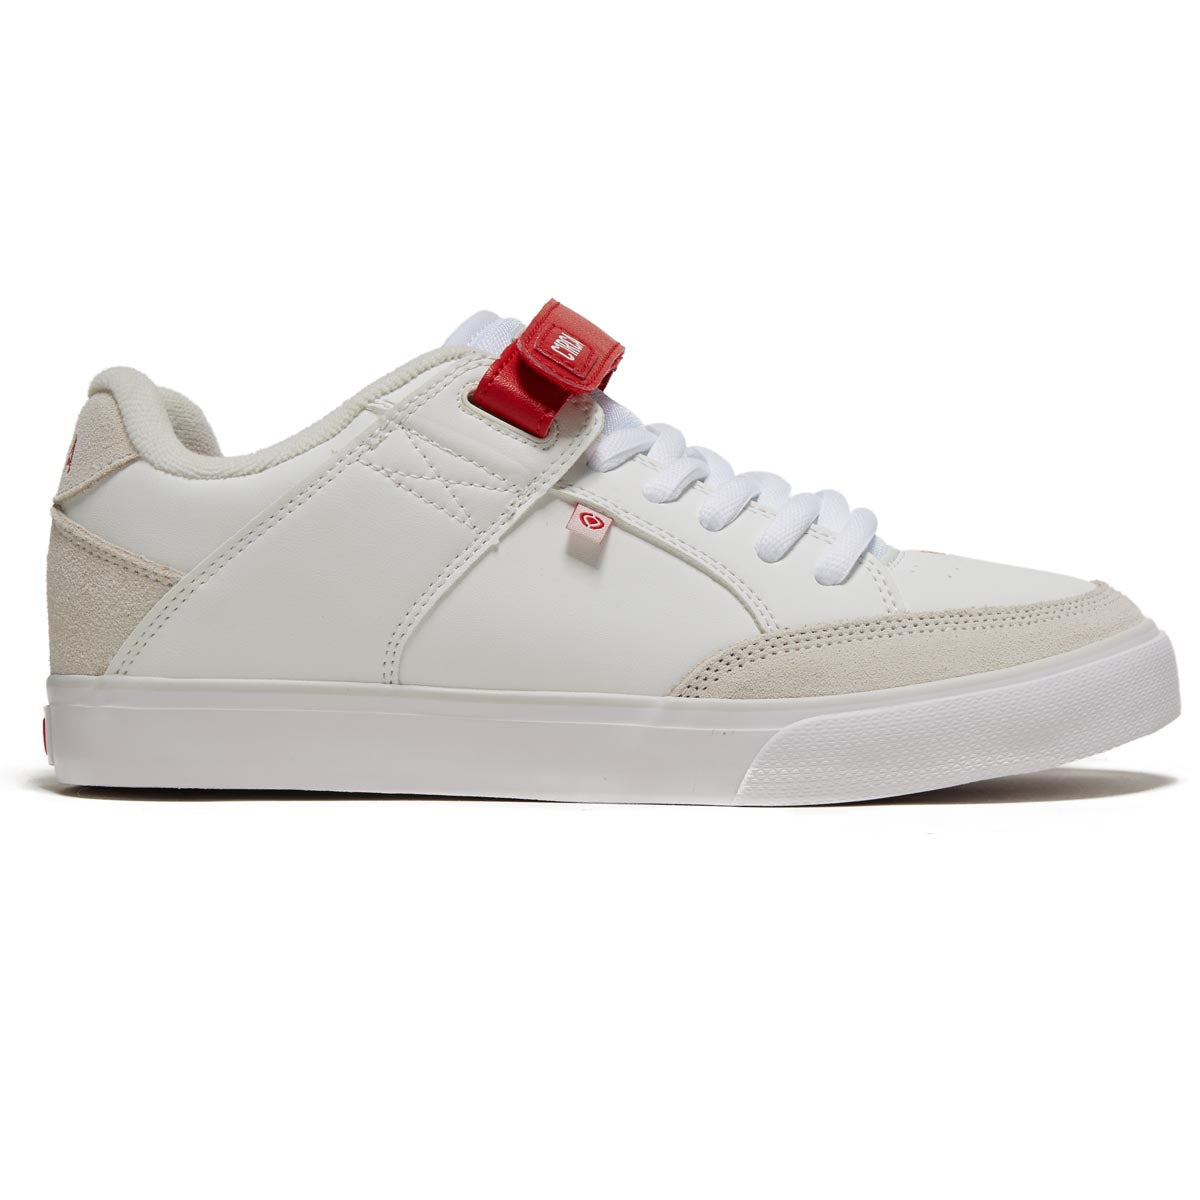 C1rca 205 Vulc Shoes - White/Red image 1